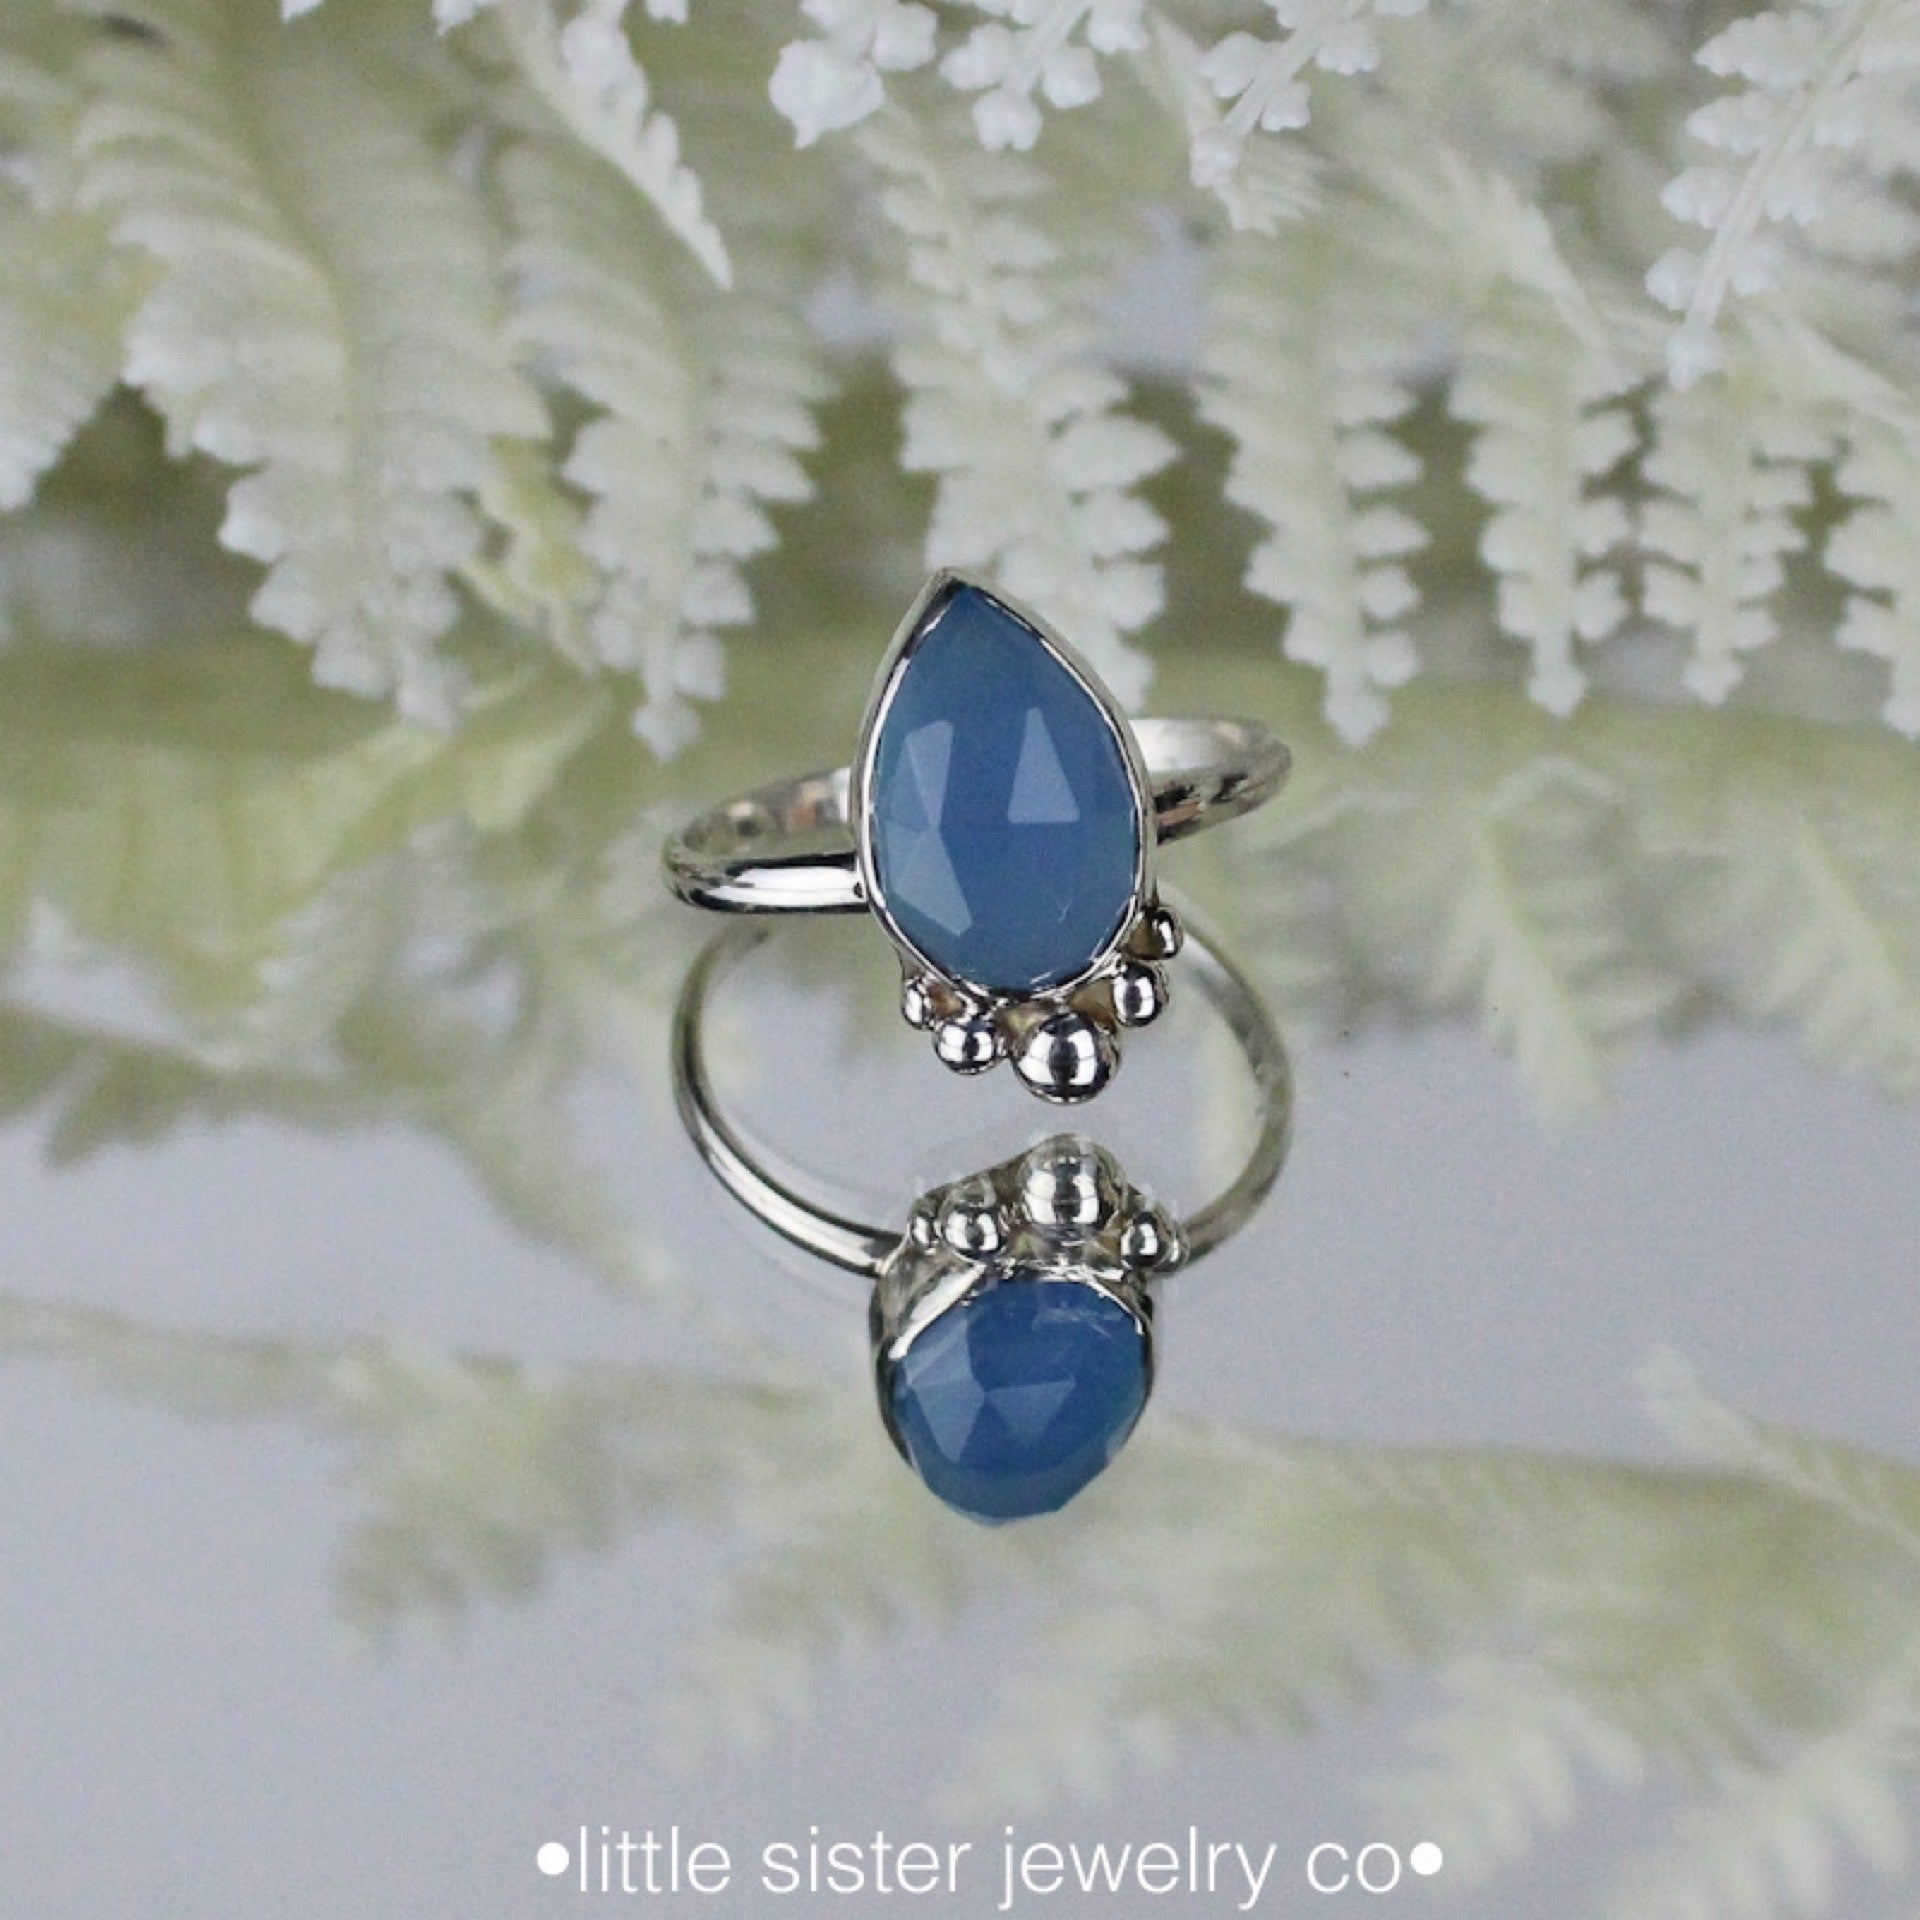 Buy TISTABENE Raw Blue Colored Stone Ring | Shoppers Stop